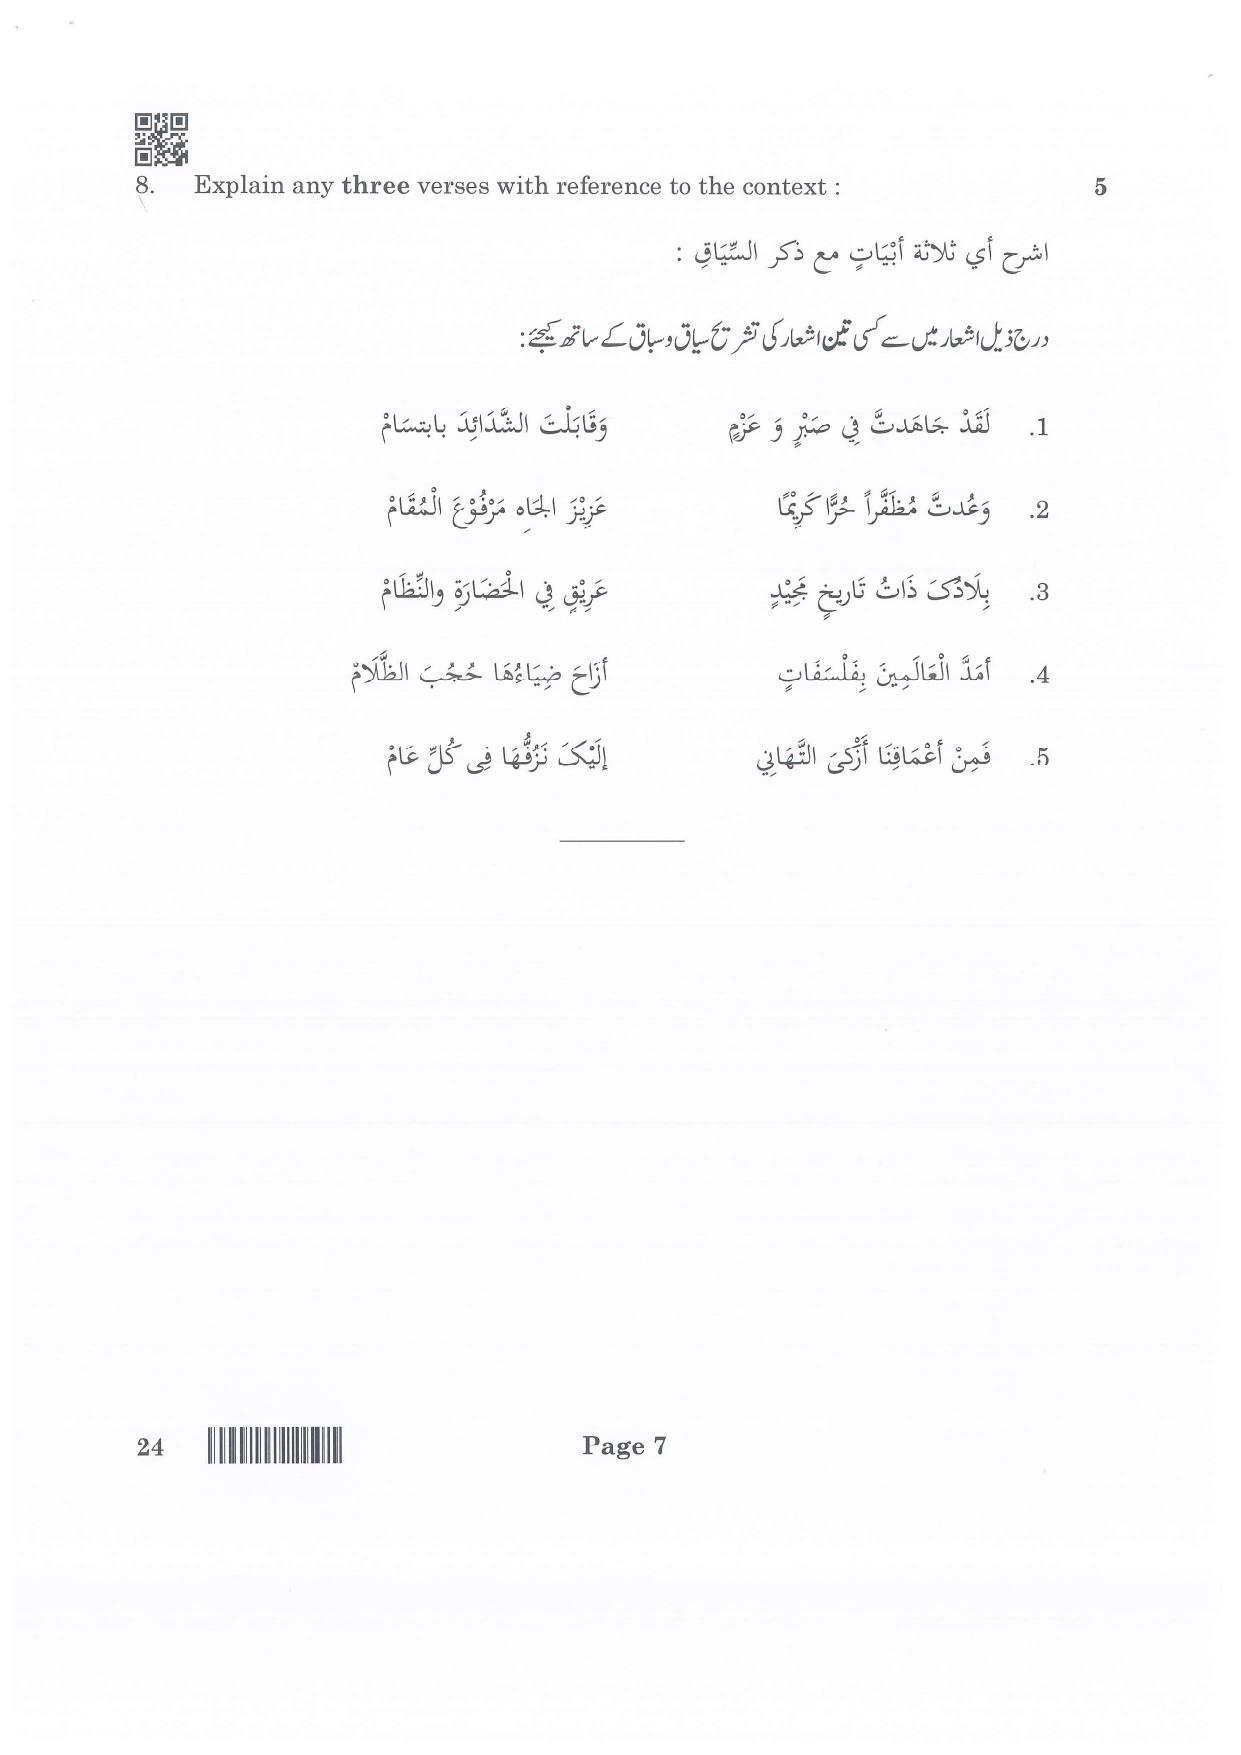 CBSE Class 10 24_Arabic 2022 Question Paper - Page 7